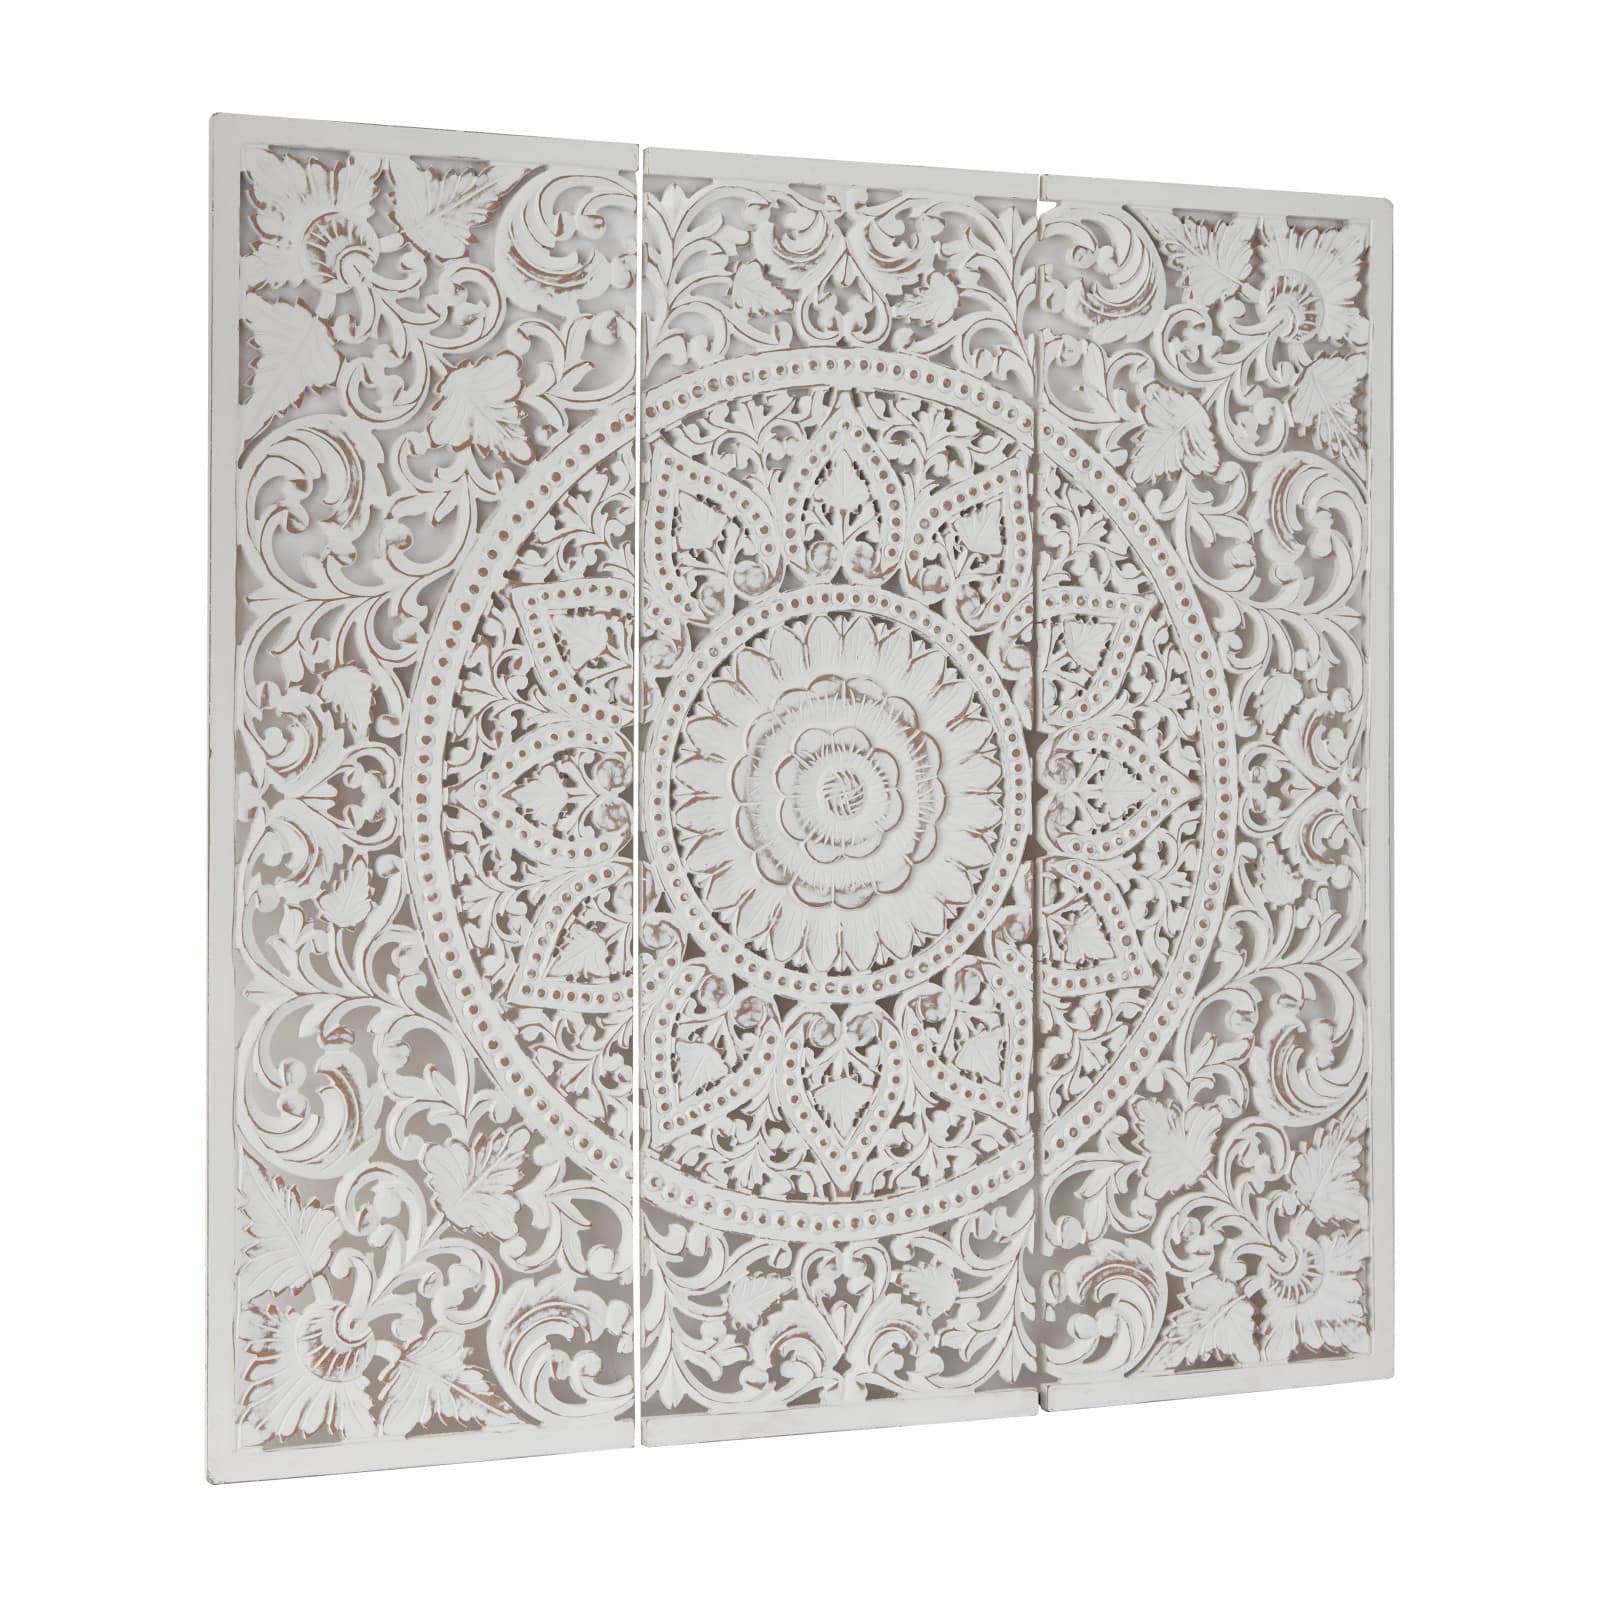 White Wood Handmade Intricately Carved Floral Wall Decor with Mandala ...